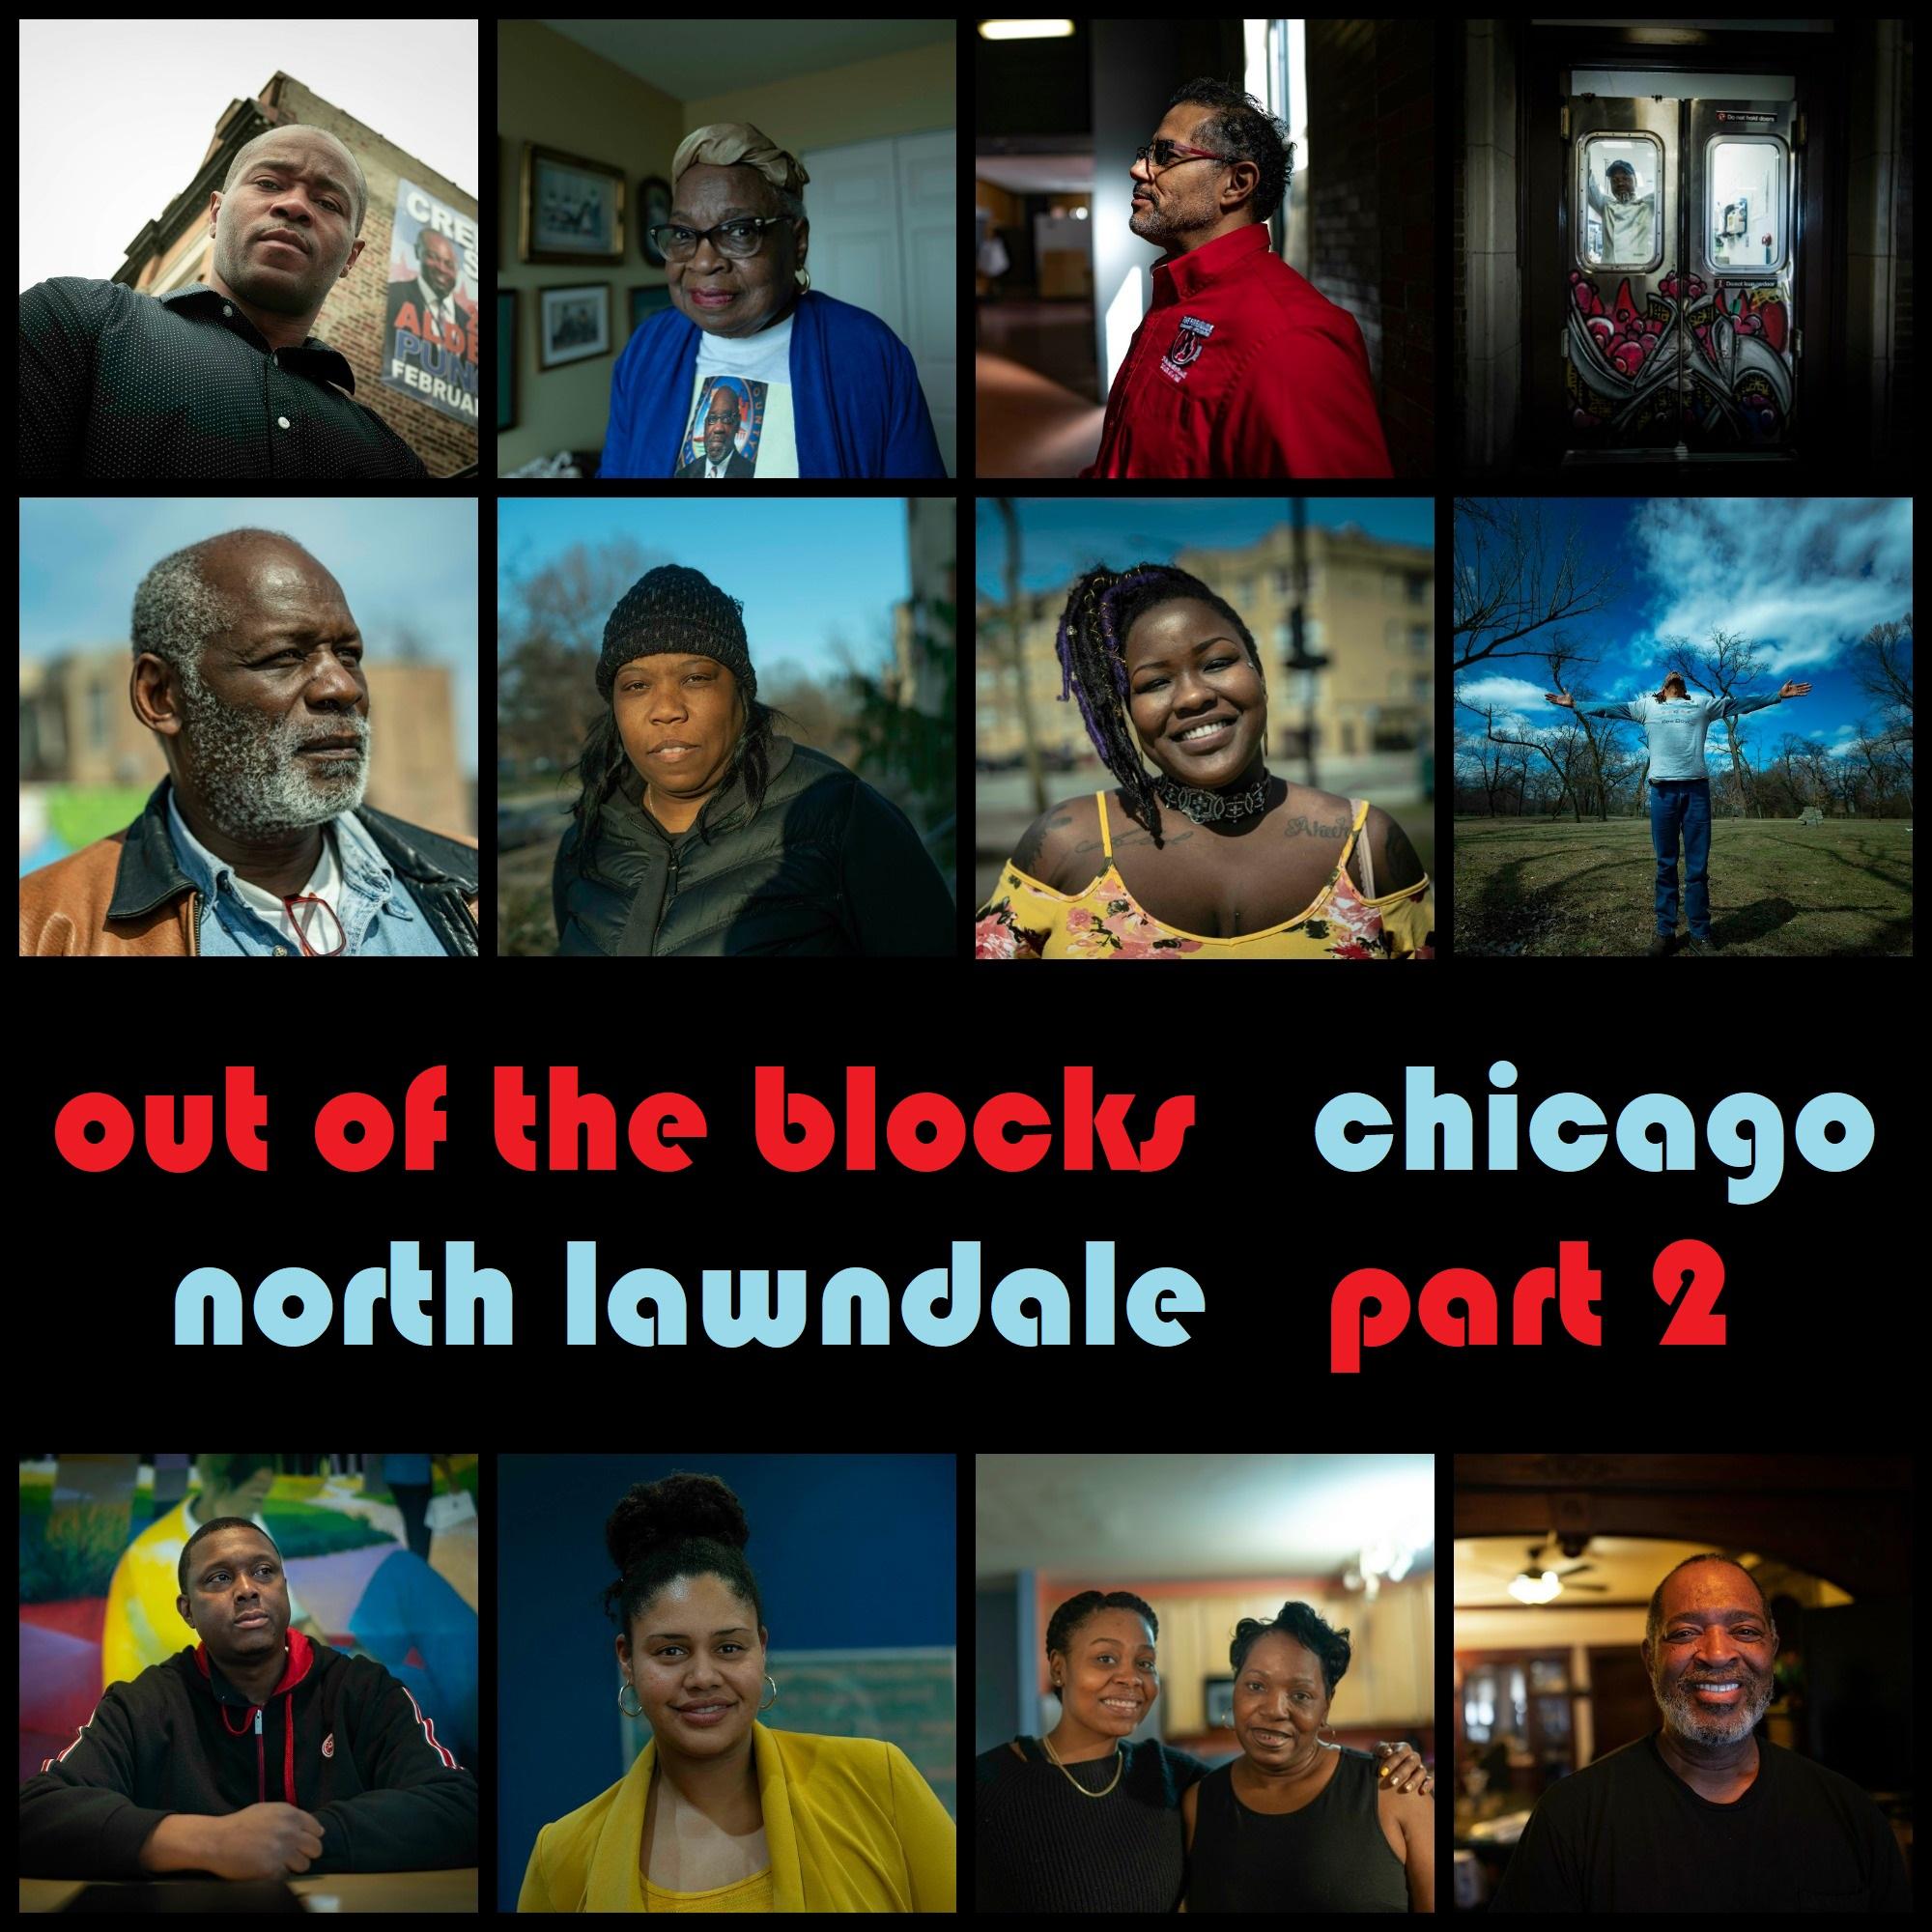 Thumbnail for "Chicago, North Lawndale, part 2: Every Day, I Politic".